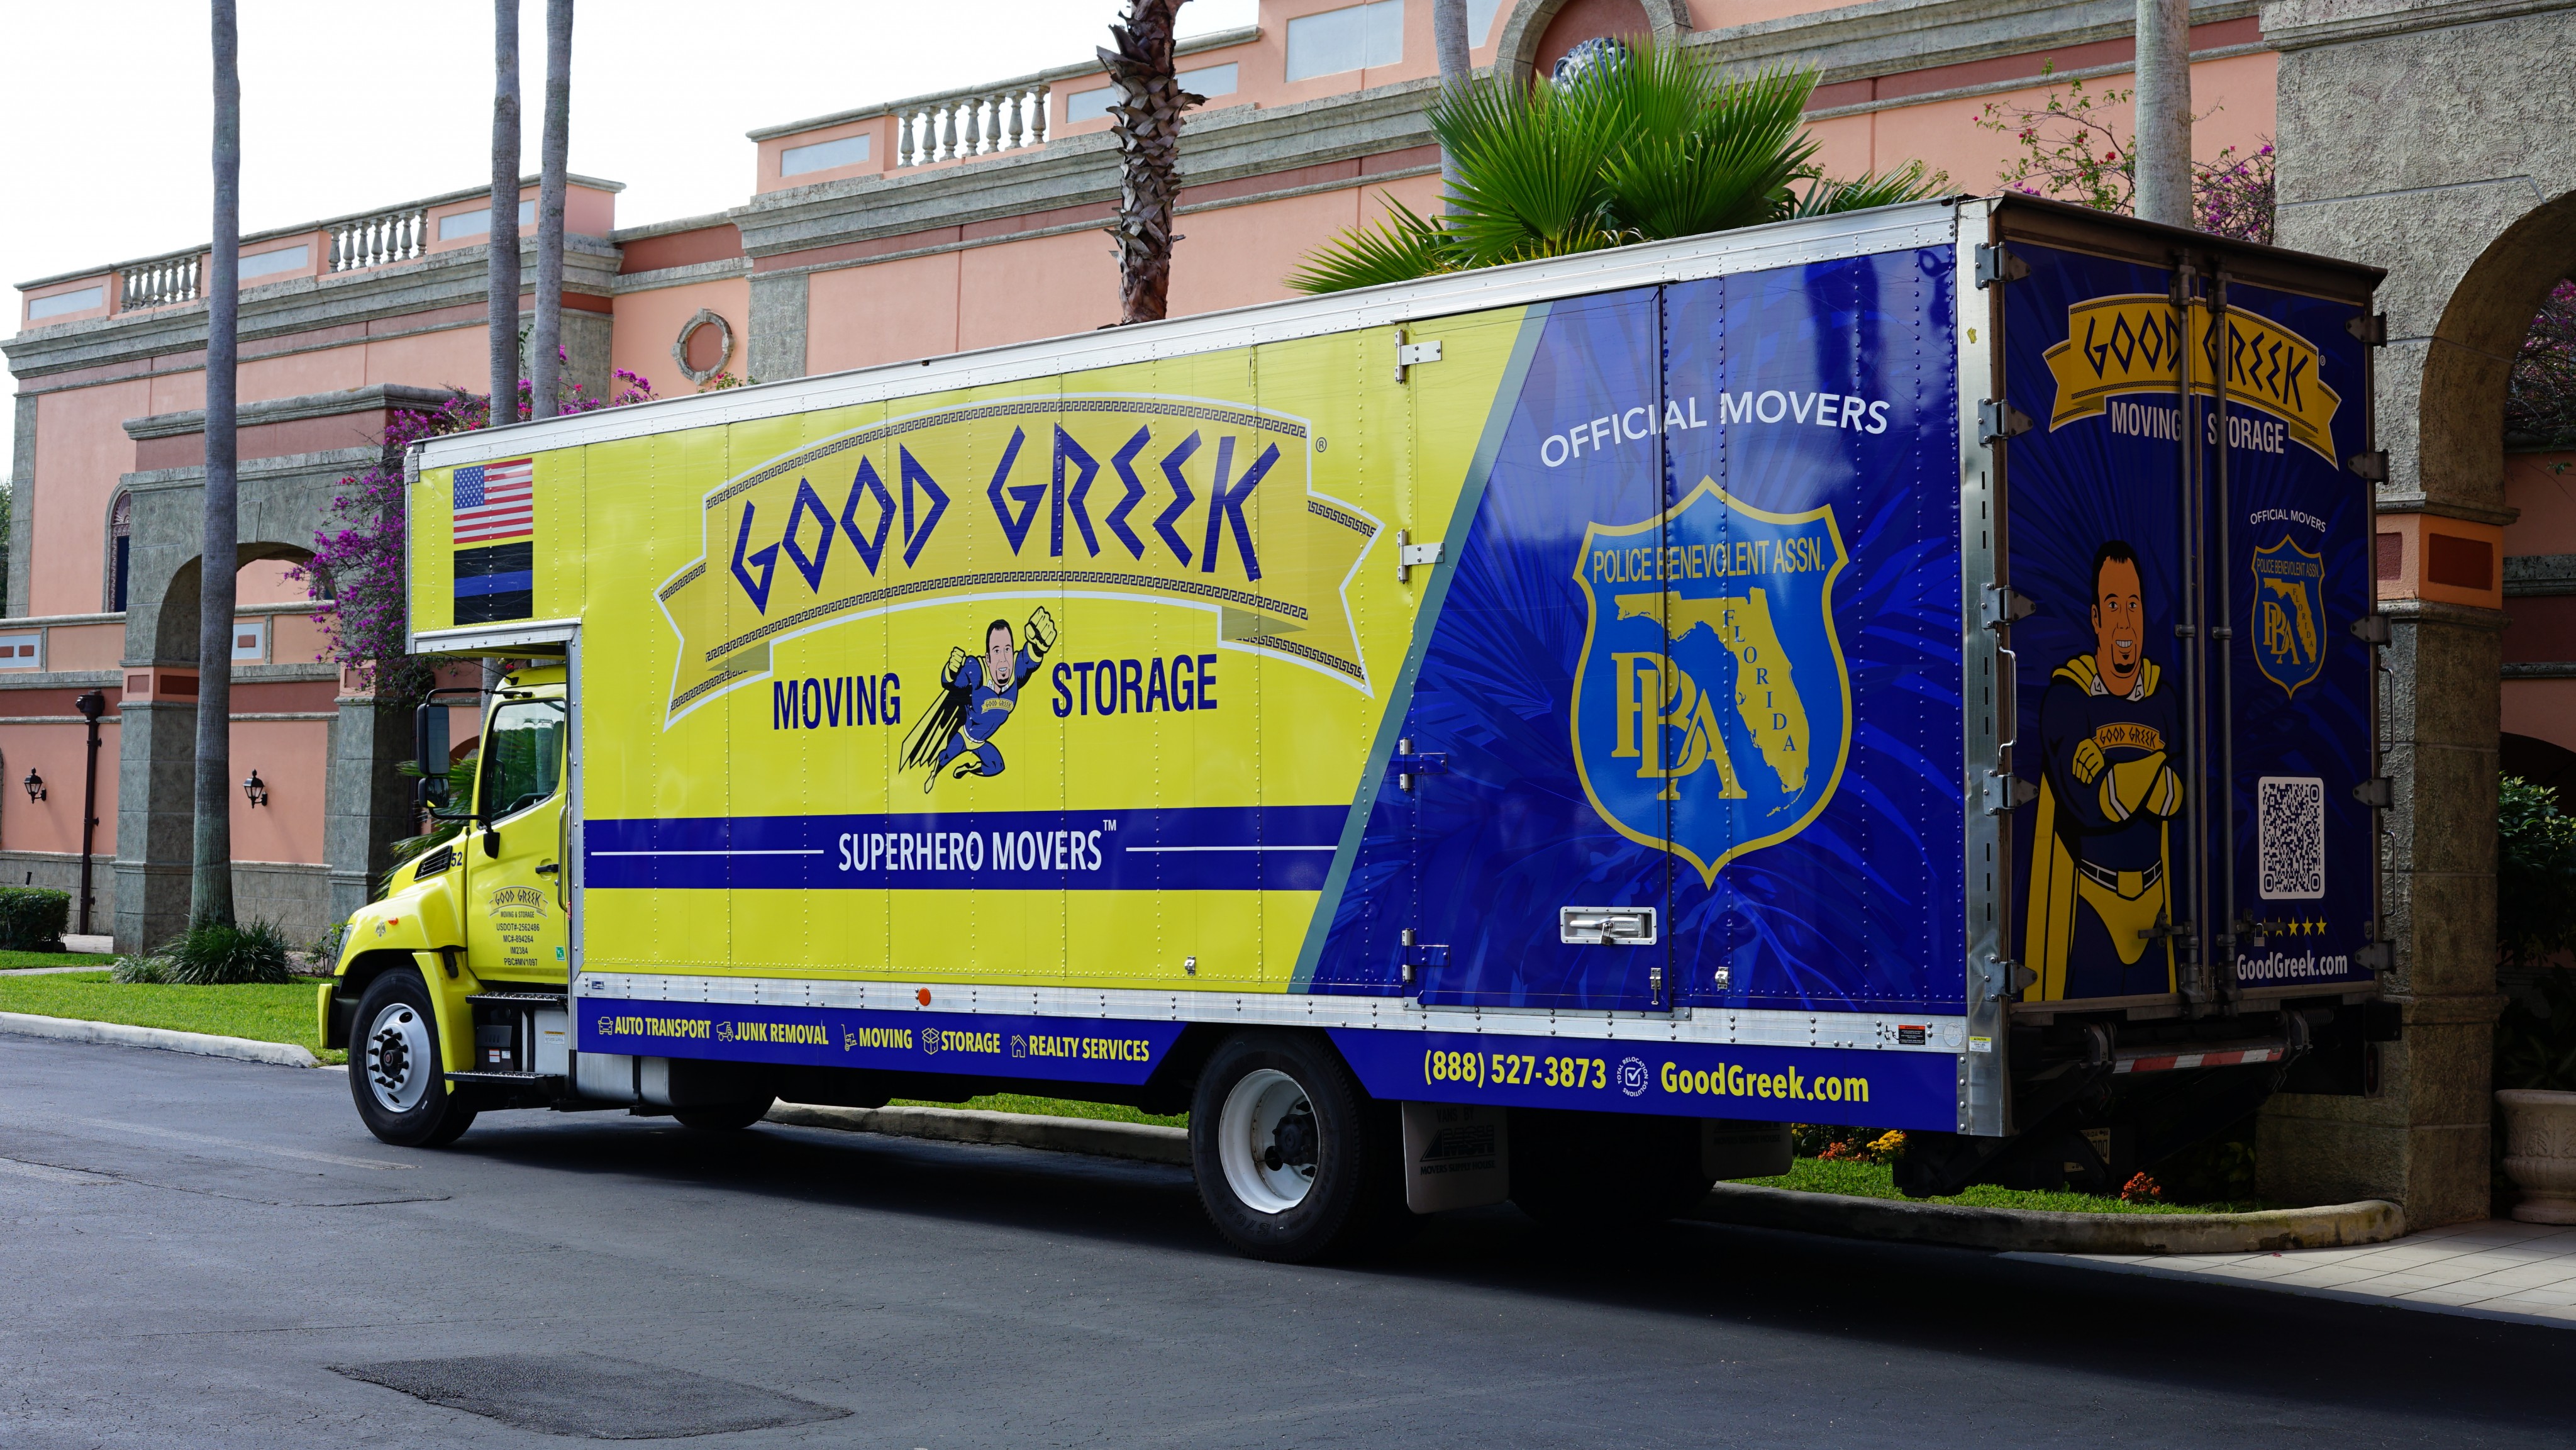 Florida Local Movers for a Hassle-Free Move – Good Greek Moving